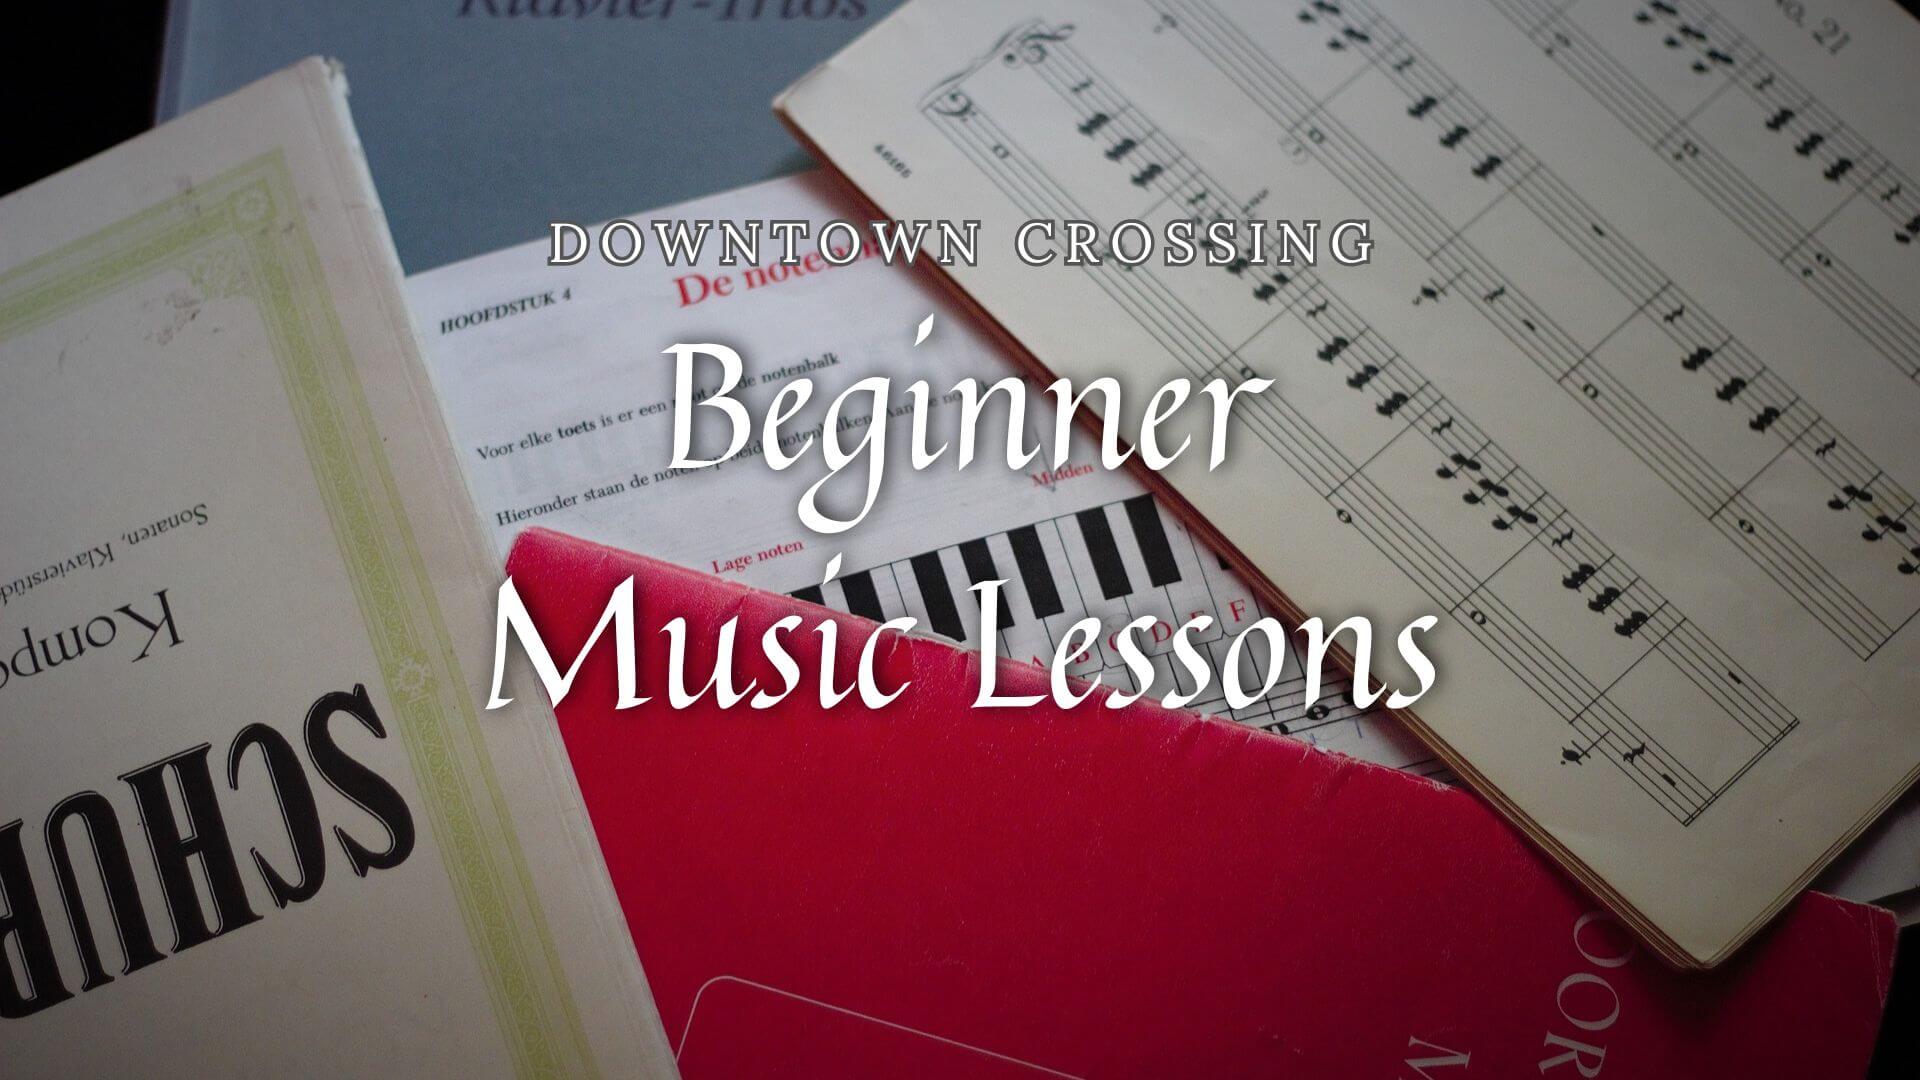 Music Classes for Beginners in Downtown Crossing, Massachusetts